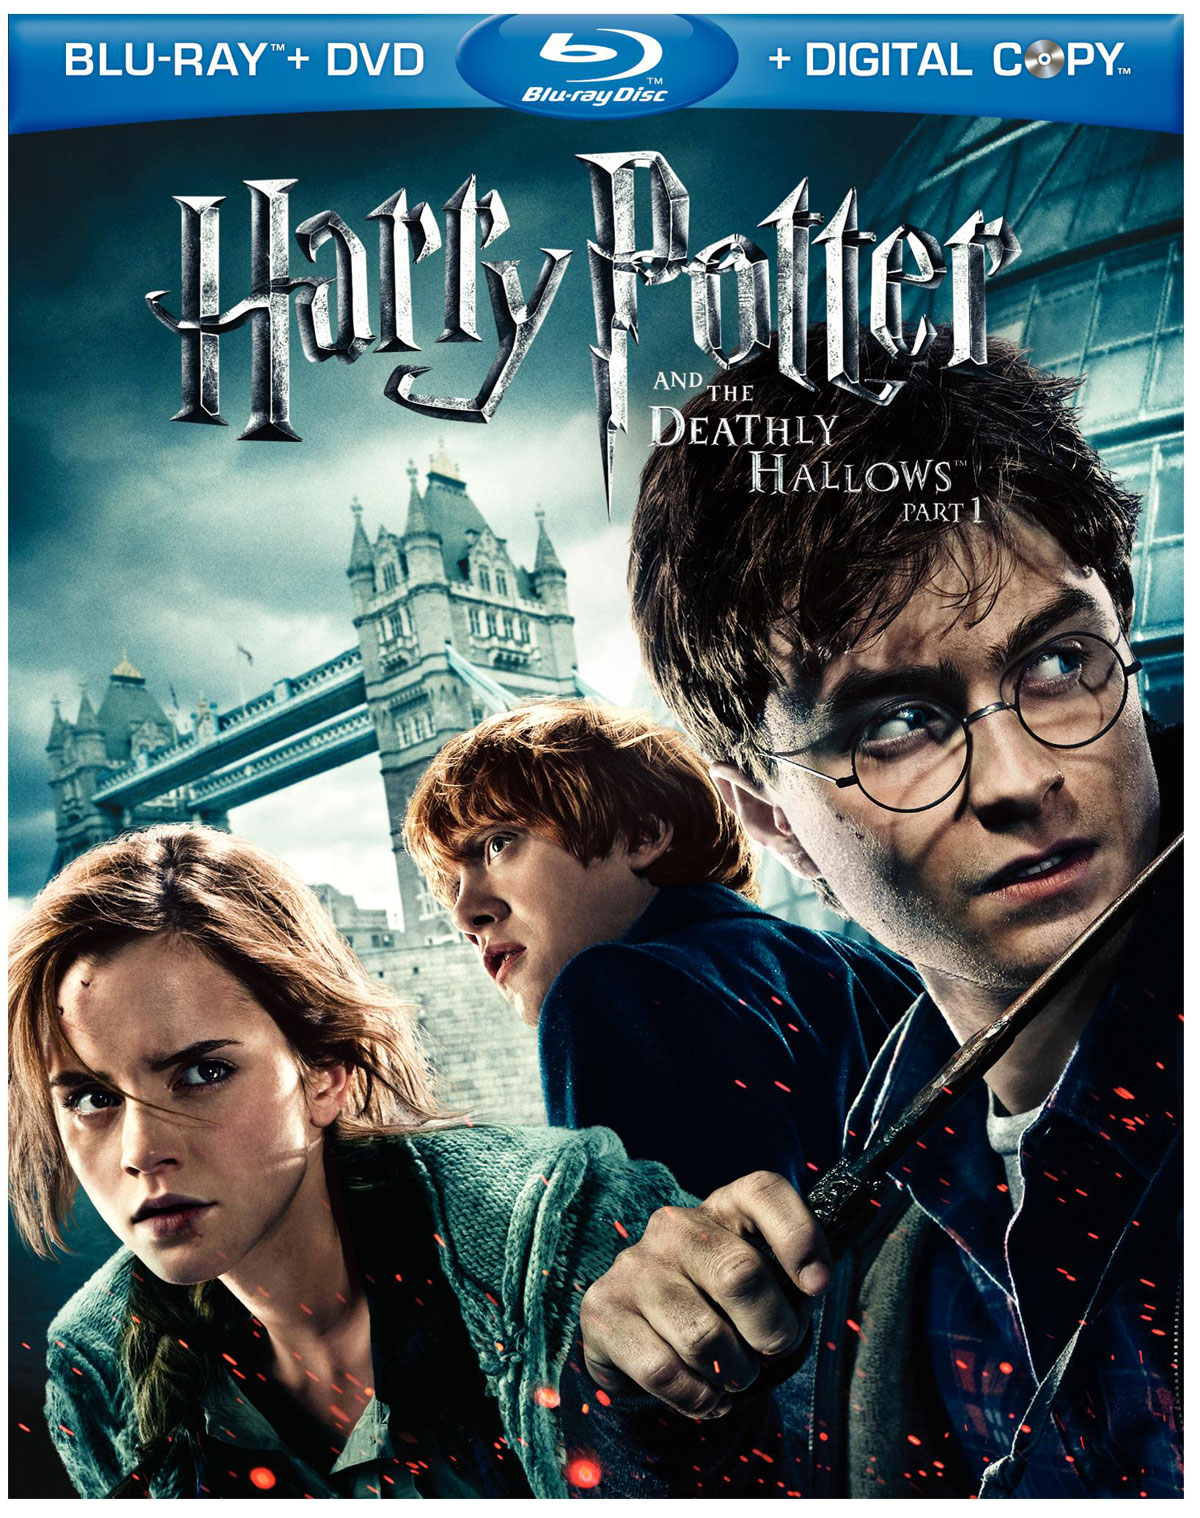 Harry Potter Deathly Hallows Part 2 Dvdscr Xvid-Fxg